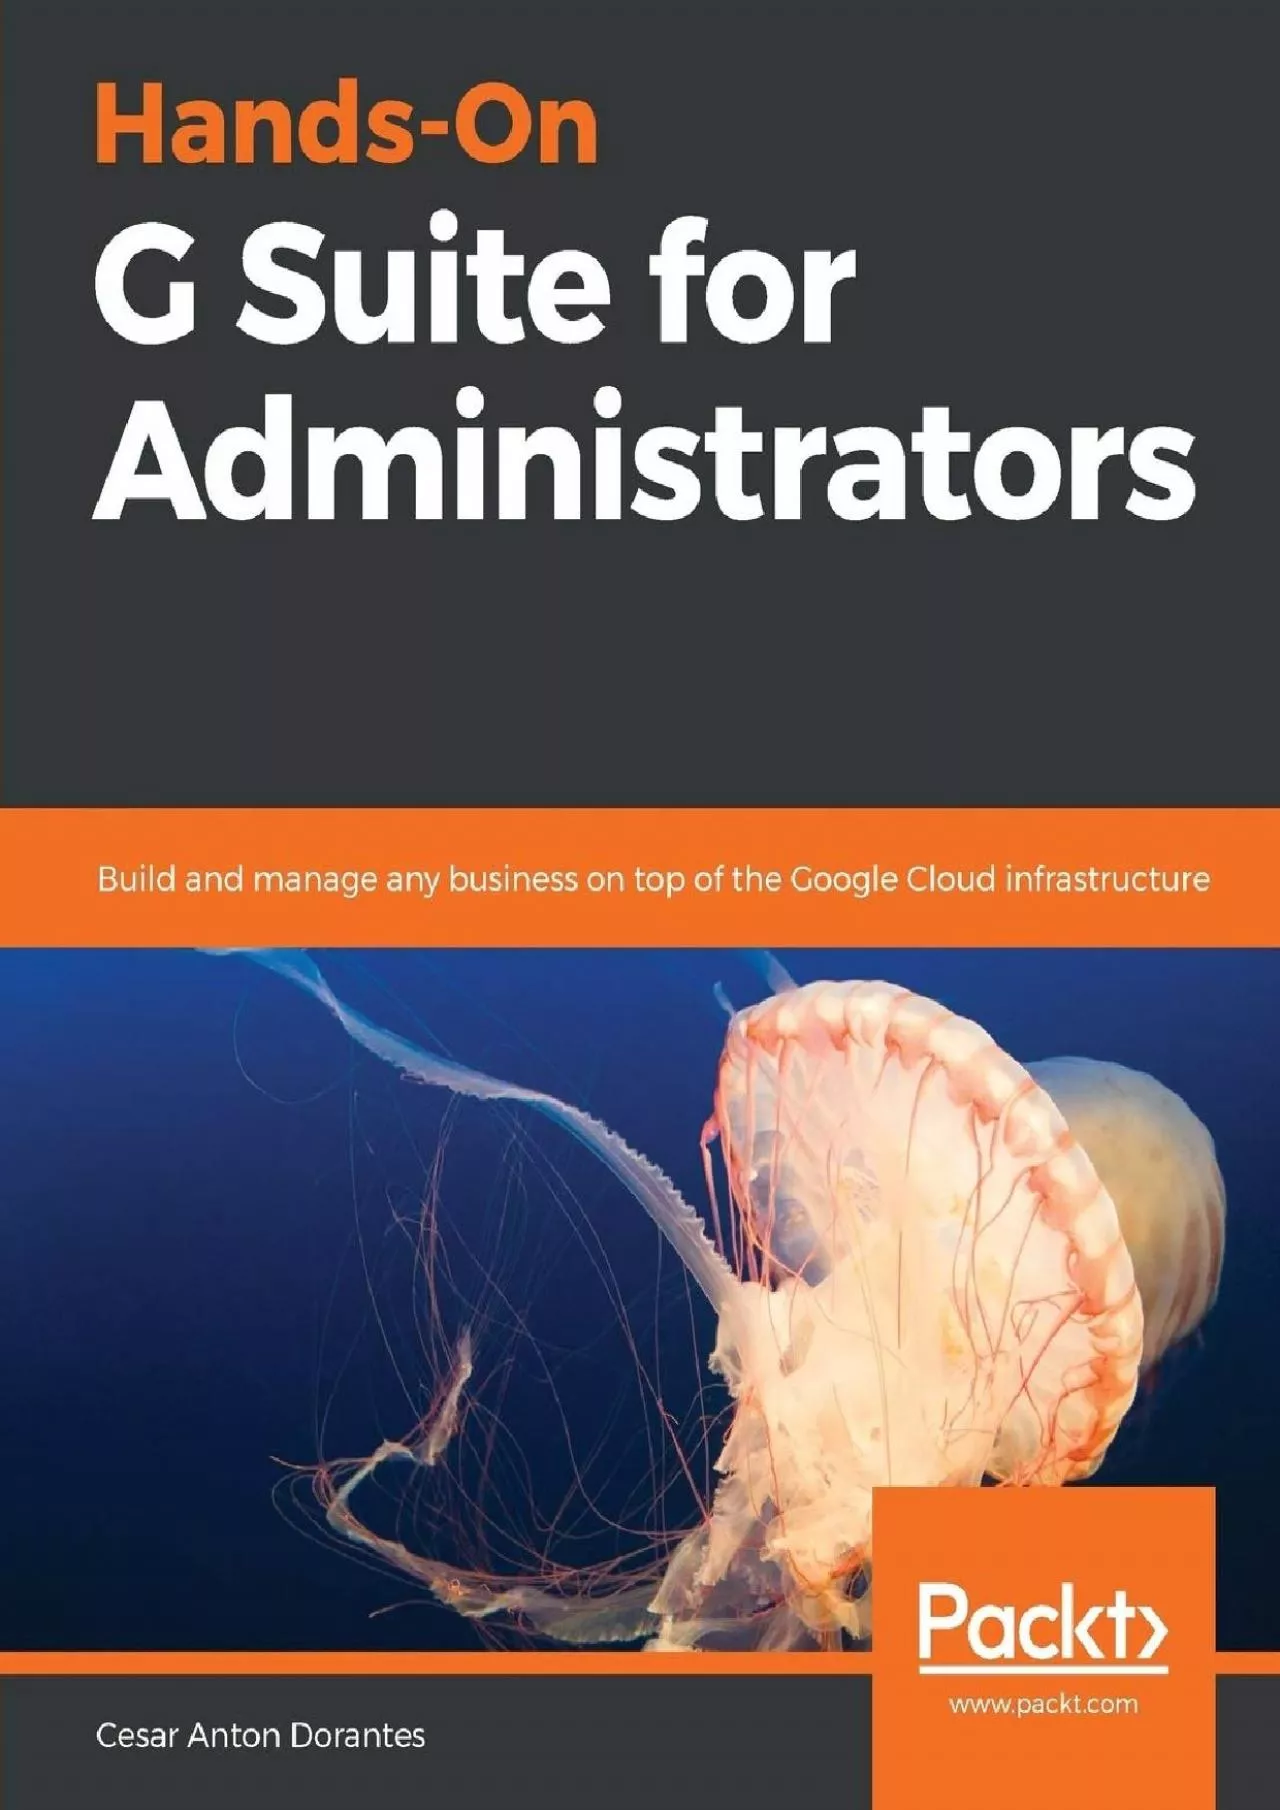 Hands-On G Suite for Administrators: Build and manage any business on top of the Google